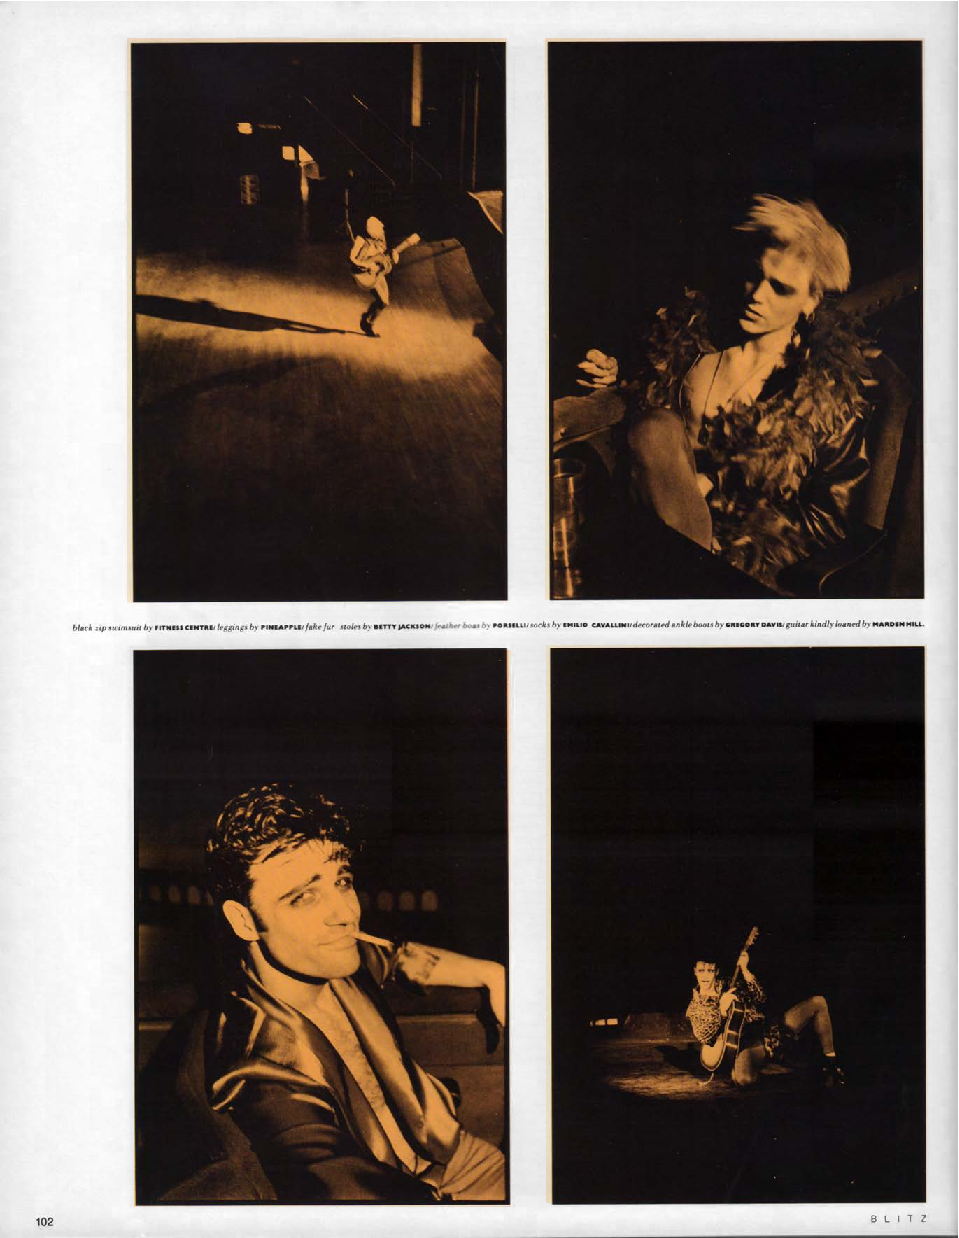 BLITZ 54 Jun 1987 fashion styled by Iain R Webb photographs by Pete Moss